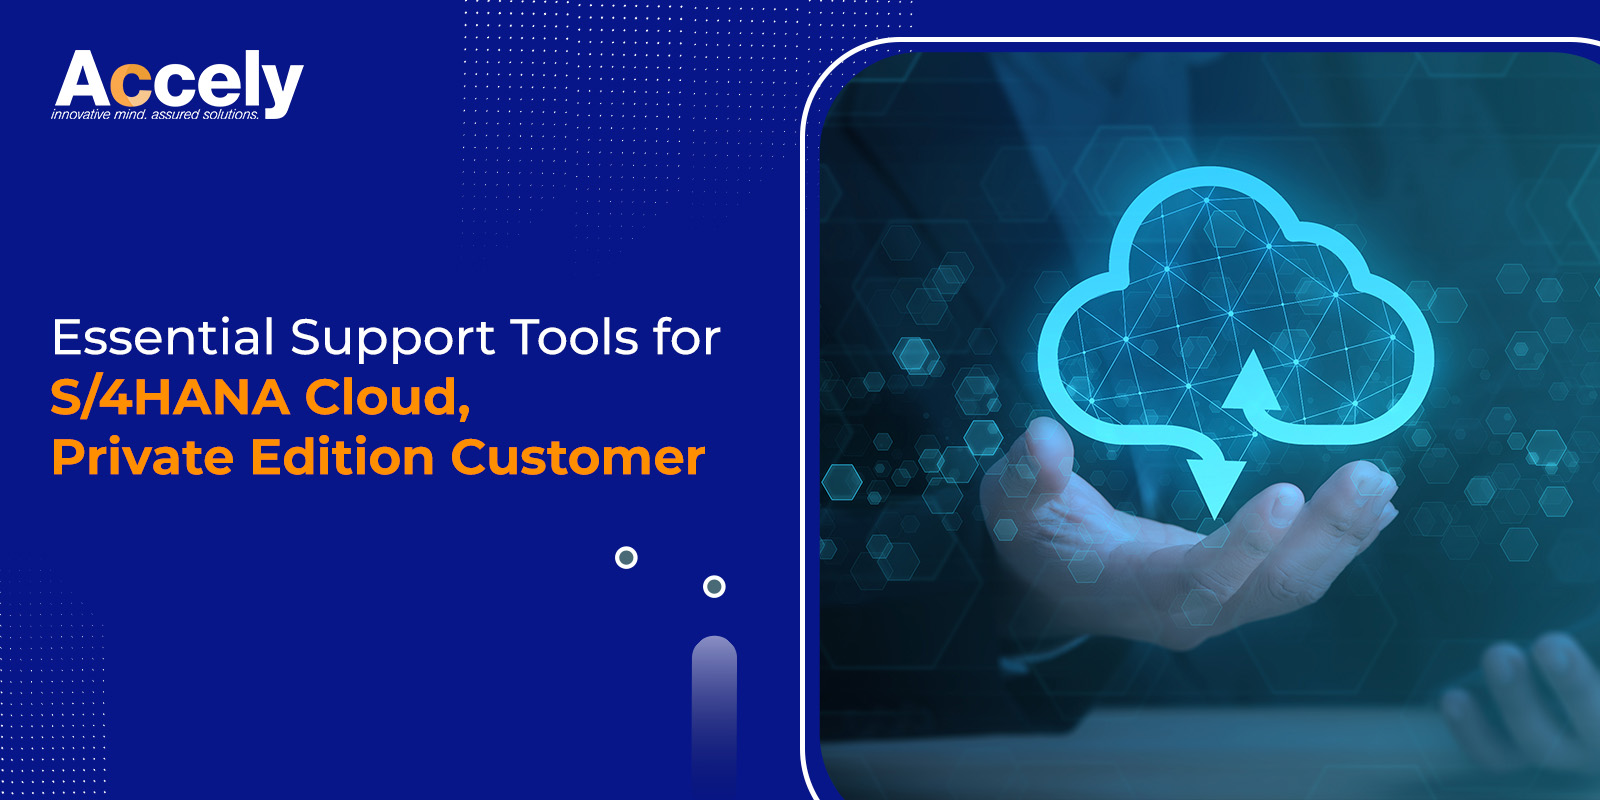 Essential Support Tools for S/4HANA Cloud, Private Edition Customer